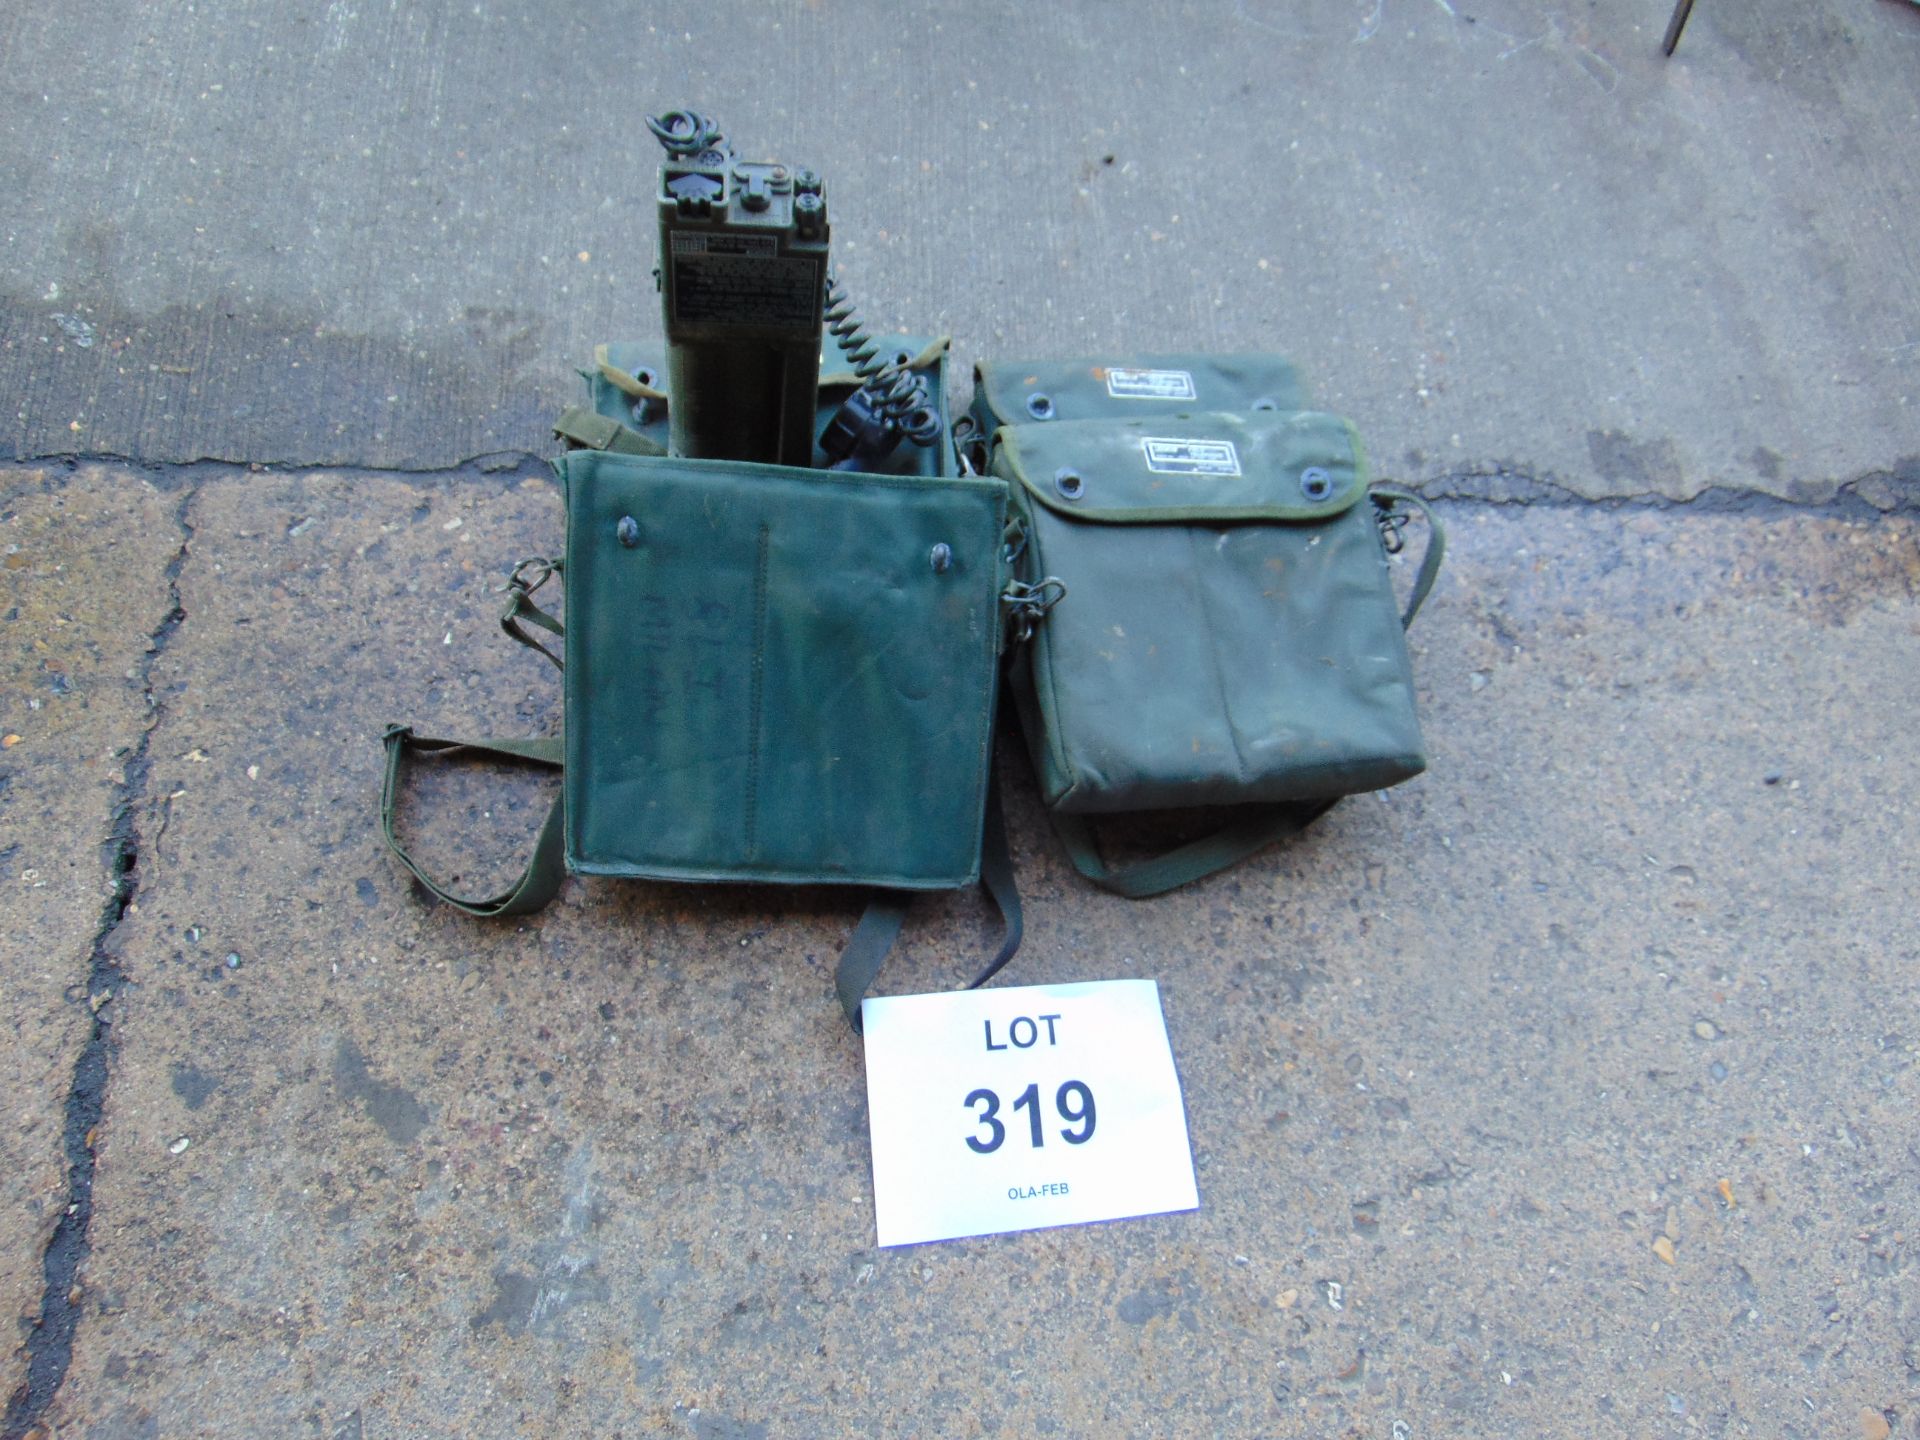 4x RACAL UK/PTC 404 Field Telephones in Pouches